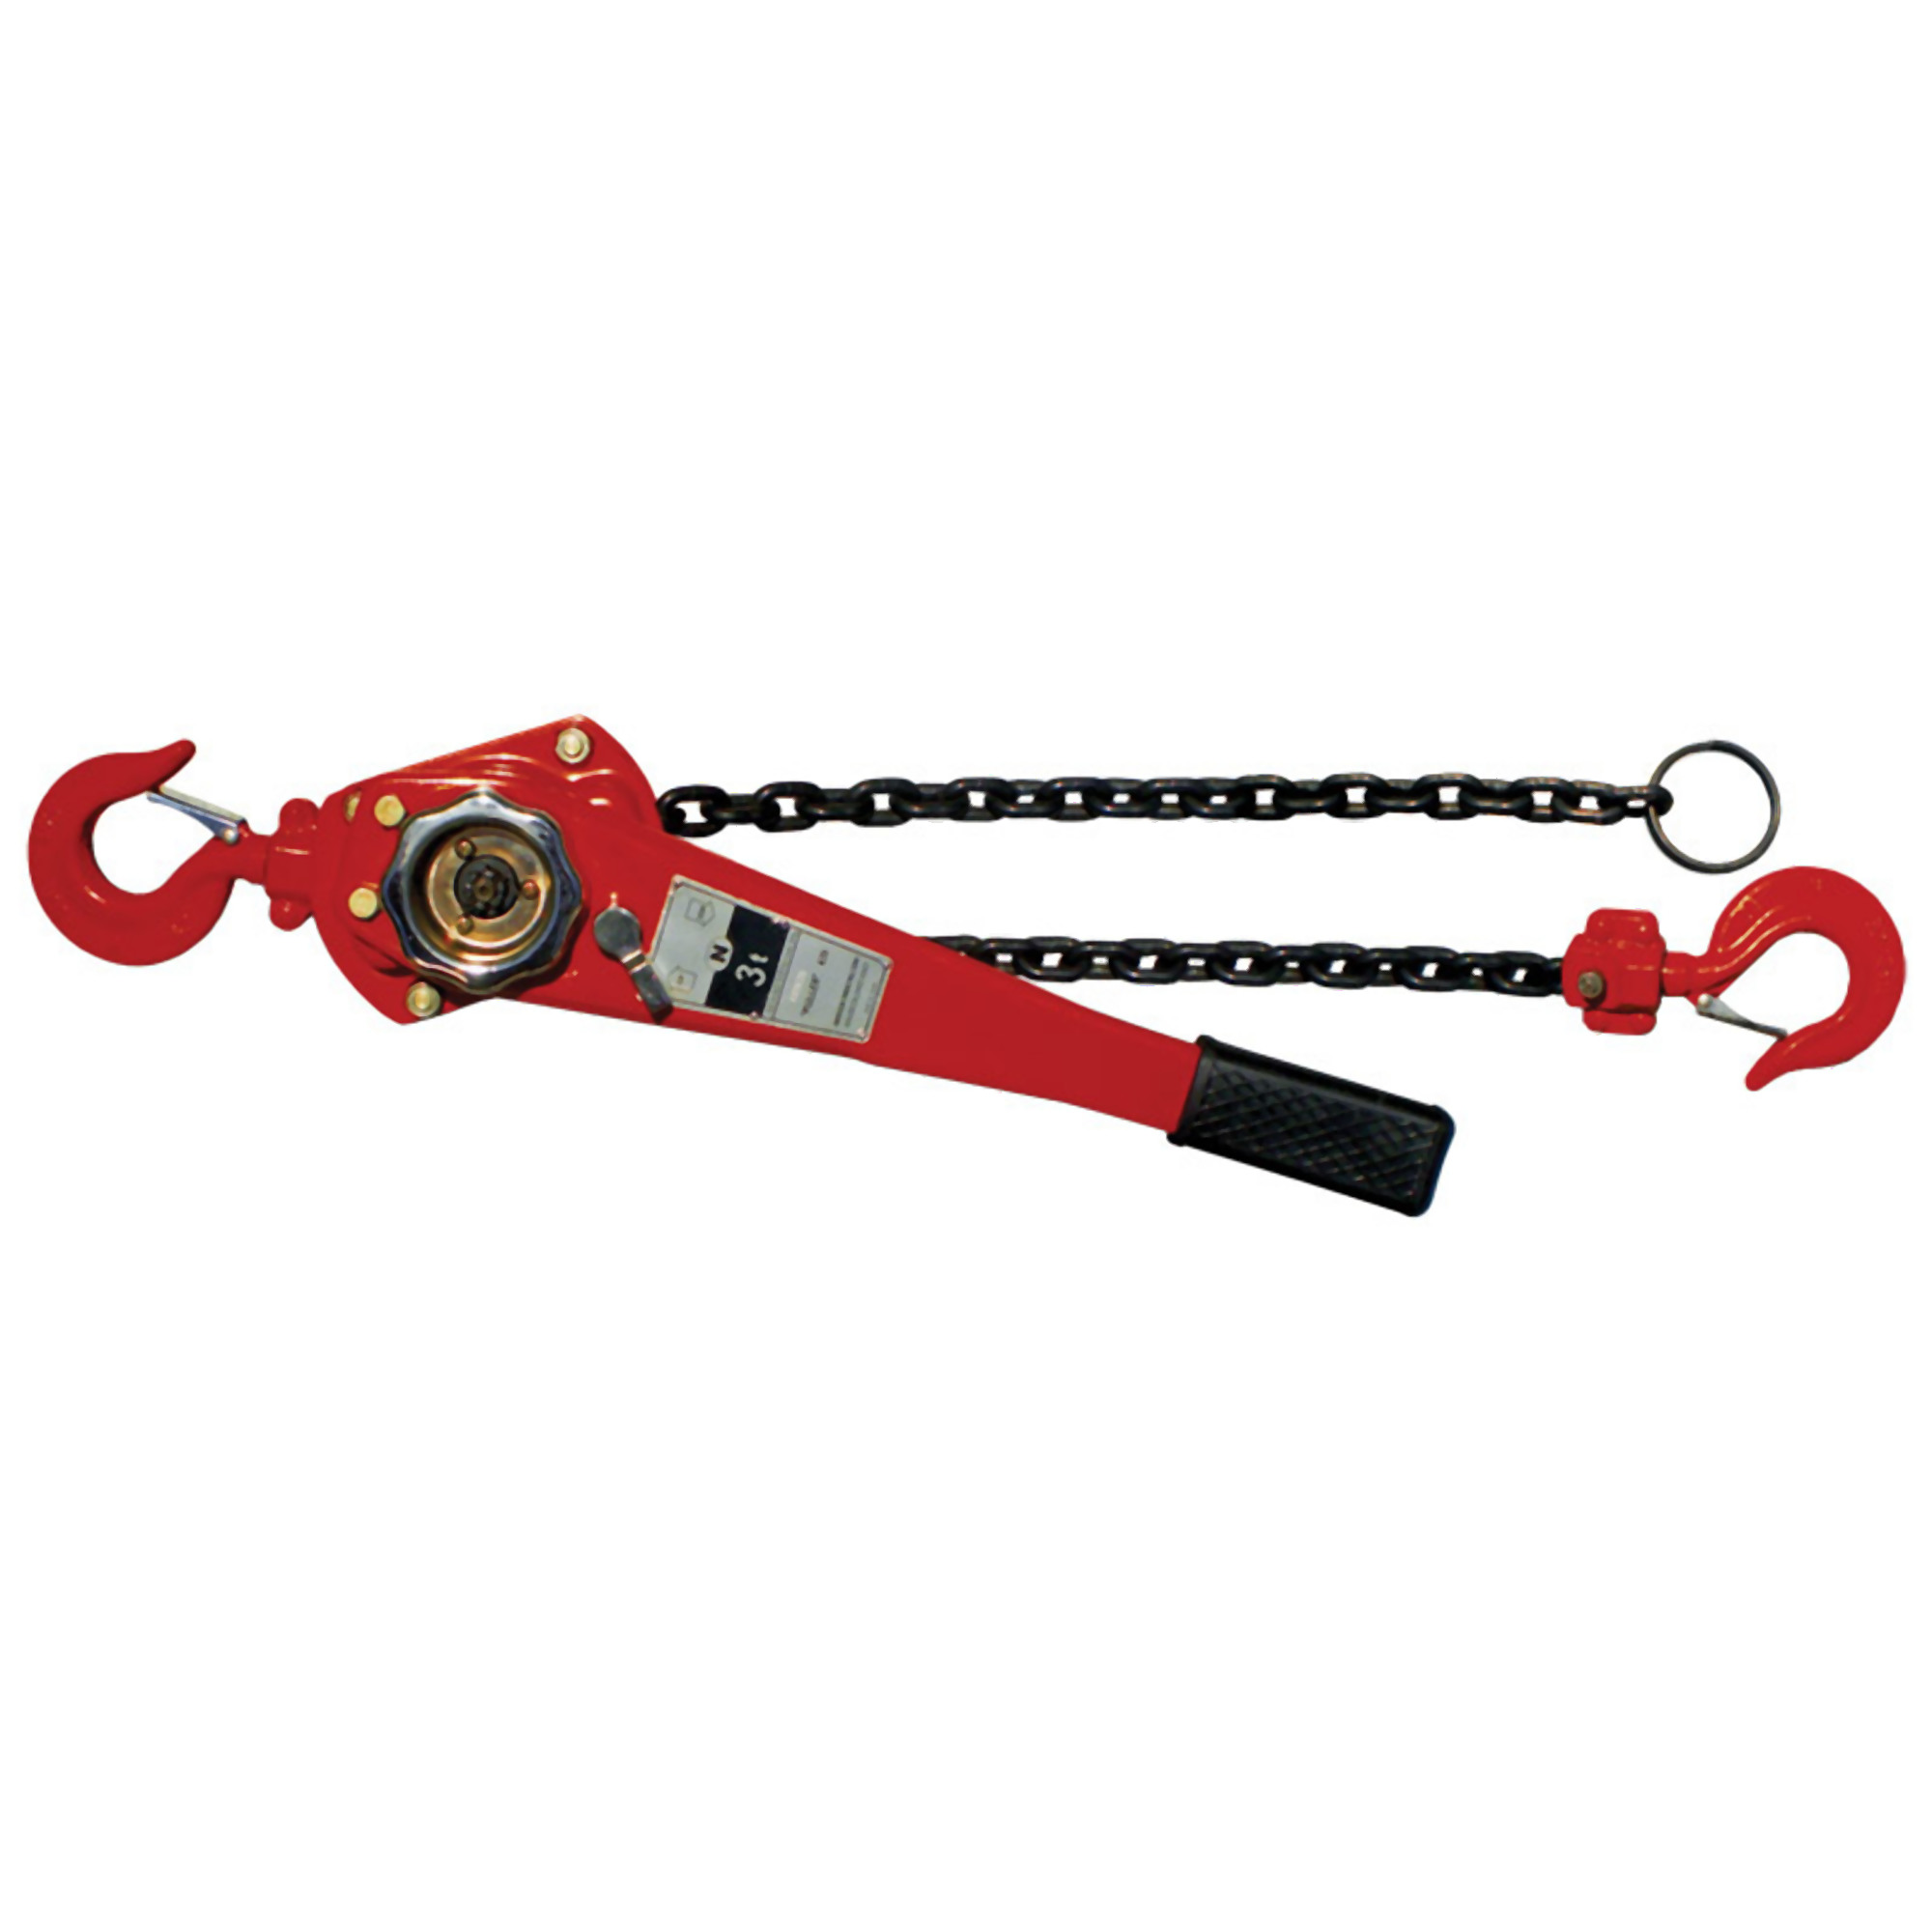 3 ton chain puller w/ 20ft. lift, Power Source Manual Lever, Capacity 6000 lb, Lift Height 20 ft, Model - American Power Pull 635-20